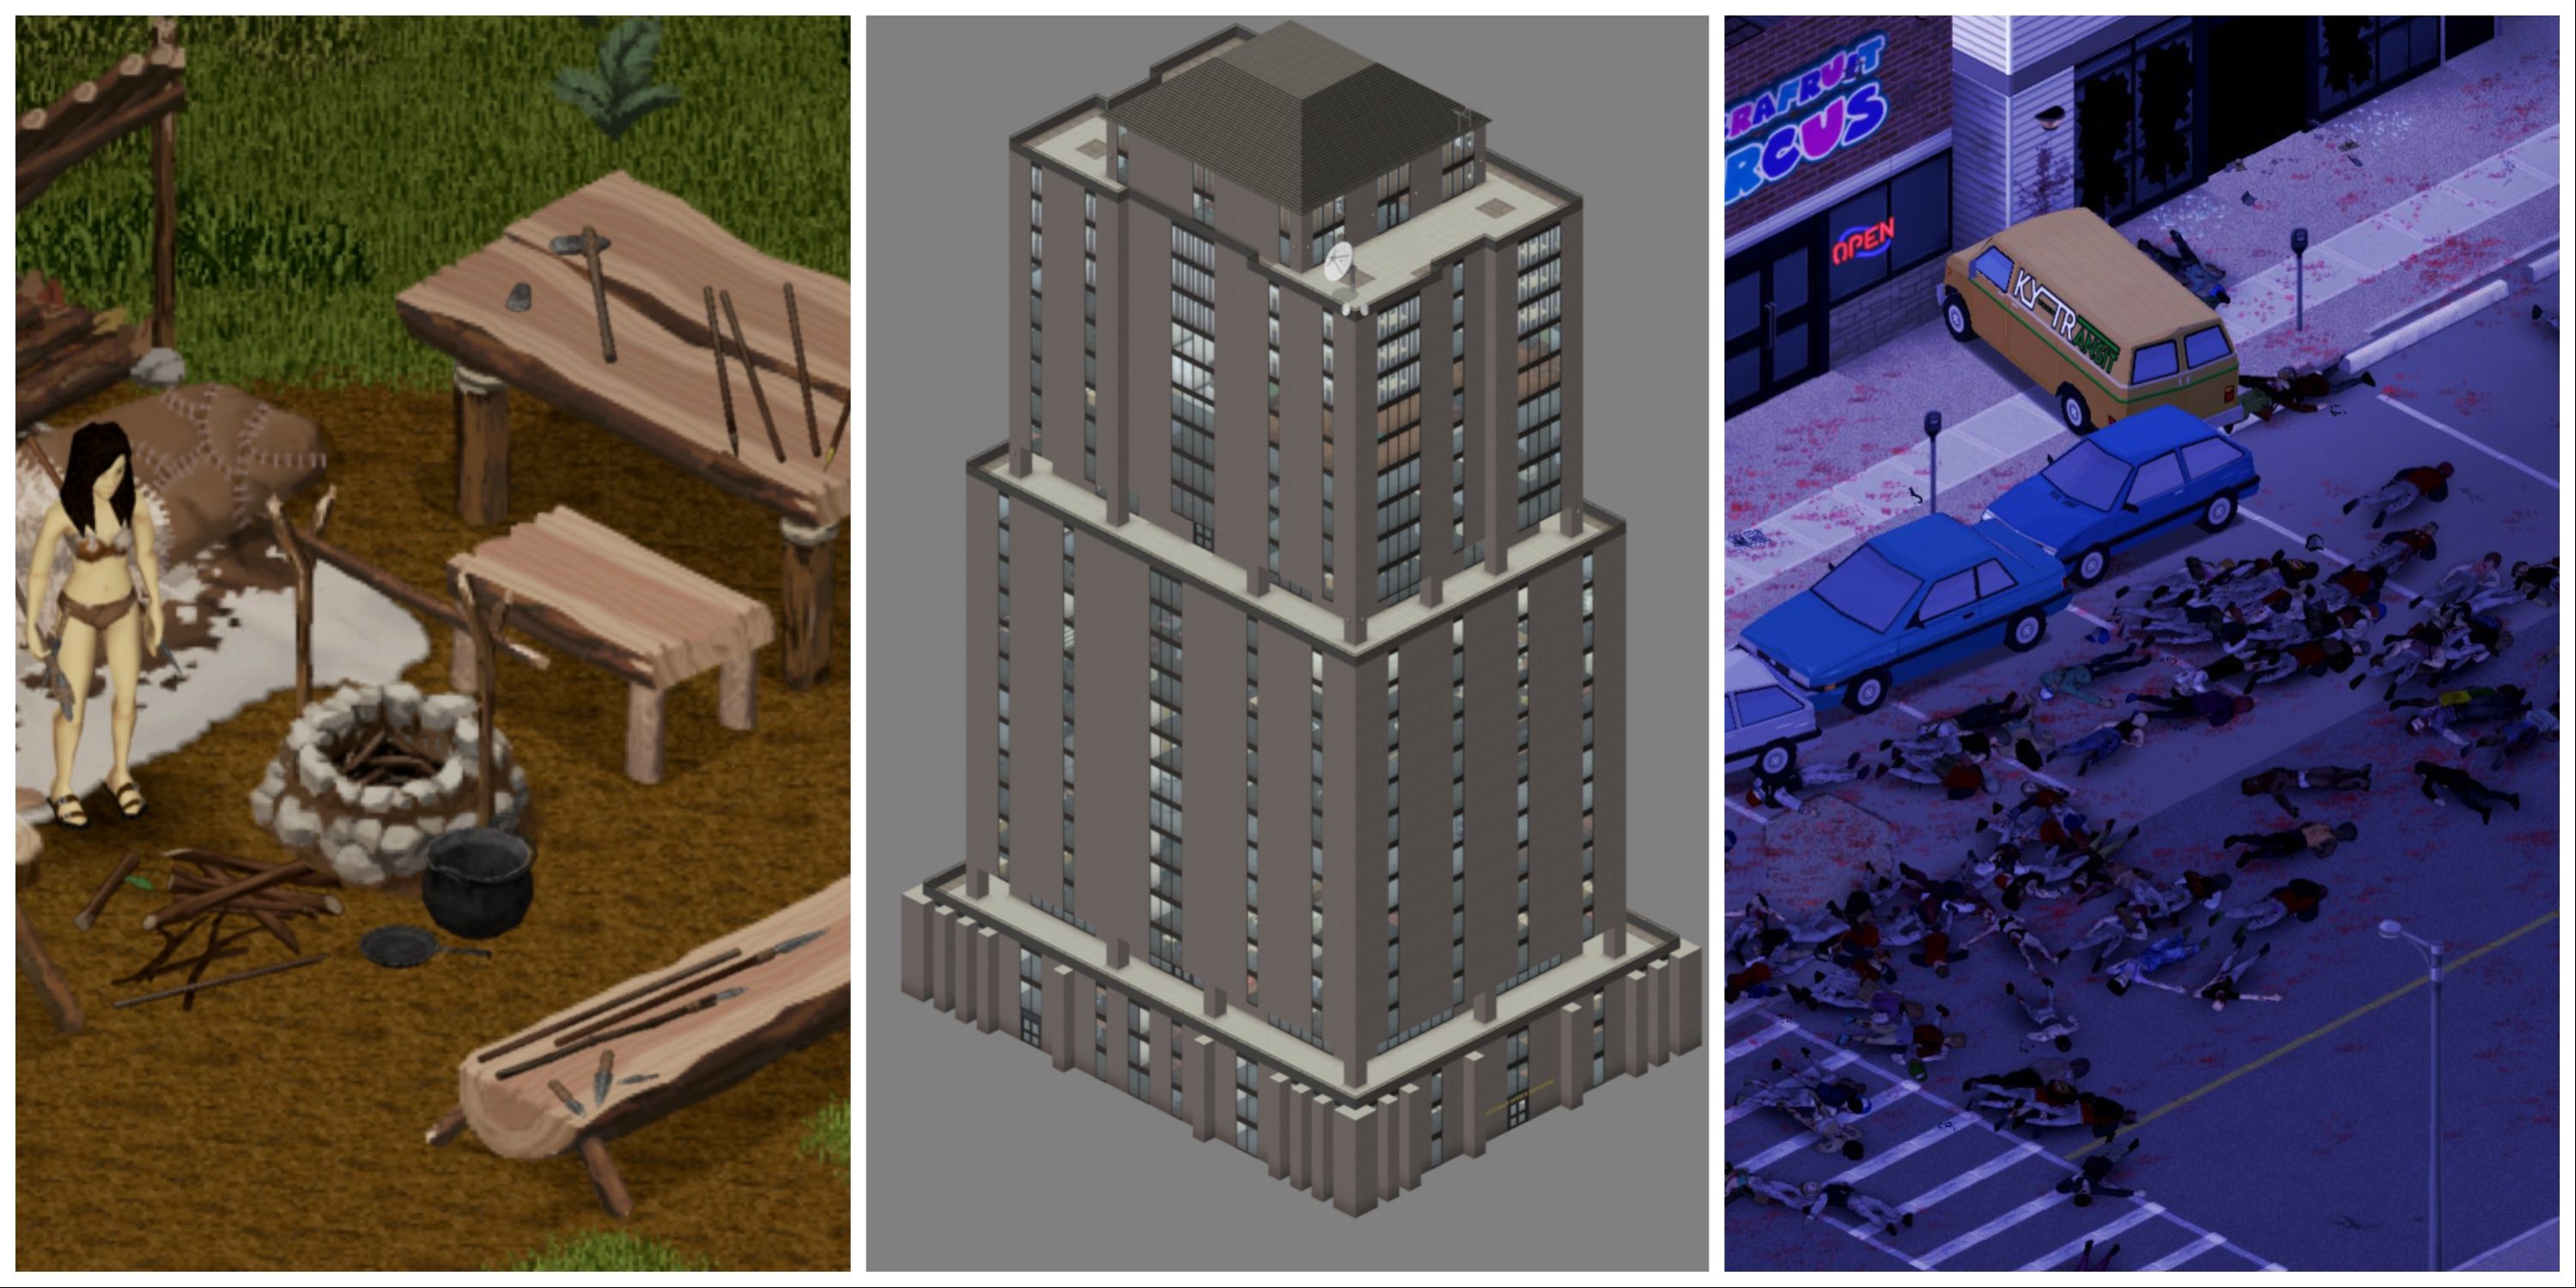 Primitive crafting skyscrapers and nighttime cars